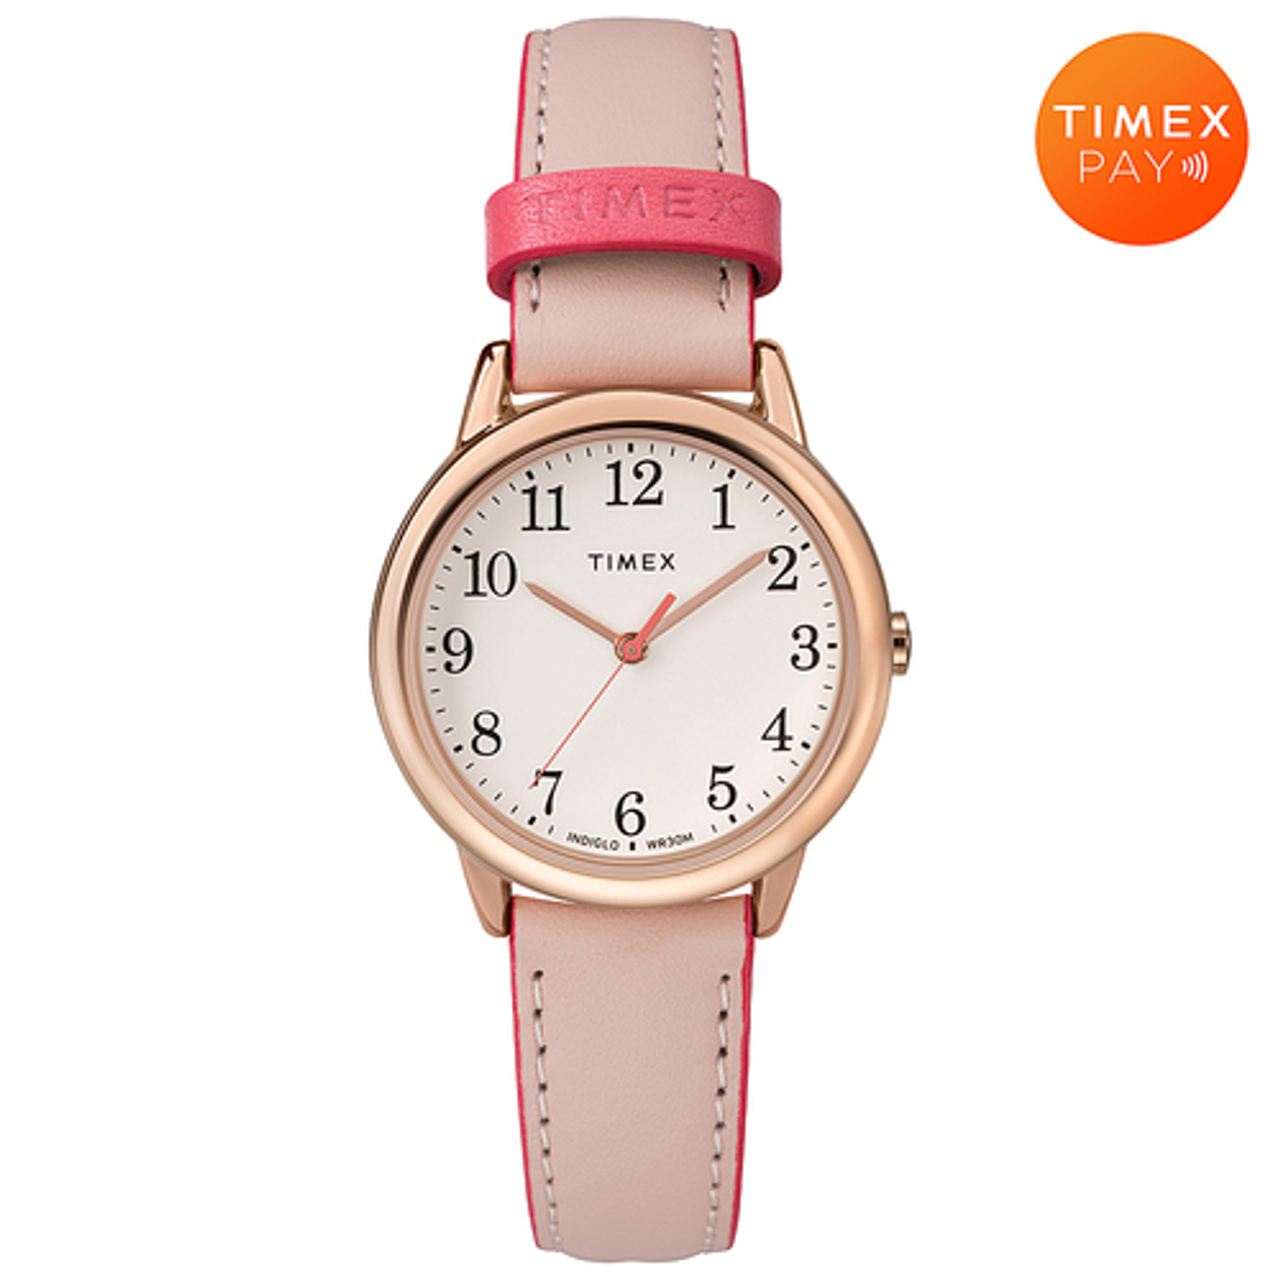 Timex Women's Easy Reader 30mm Color Pop with Timex Pay – Rose Gold-Tone Case with Pink Leather Strap - Pink/Rose Gold/Timex Pay